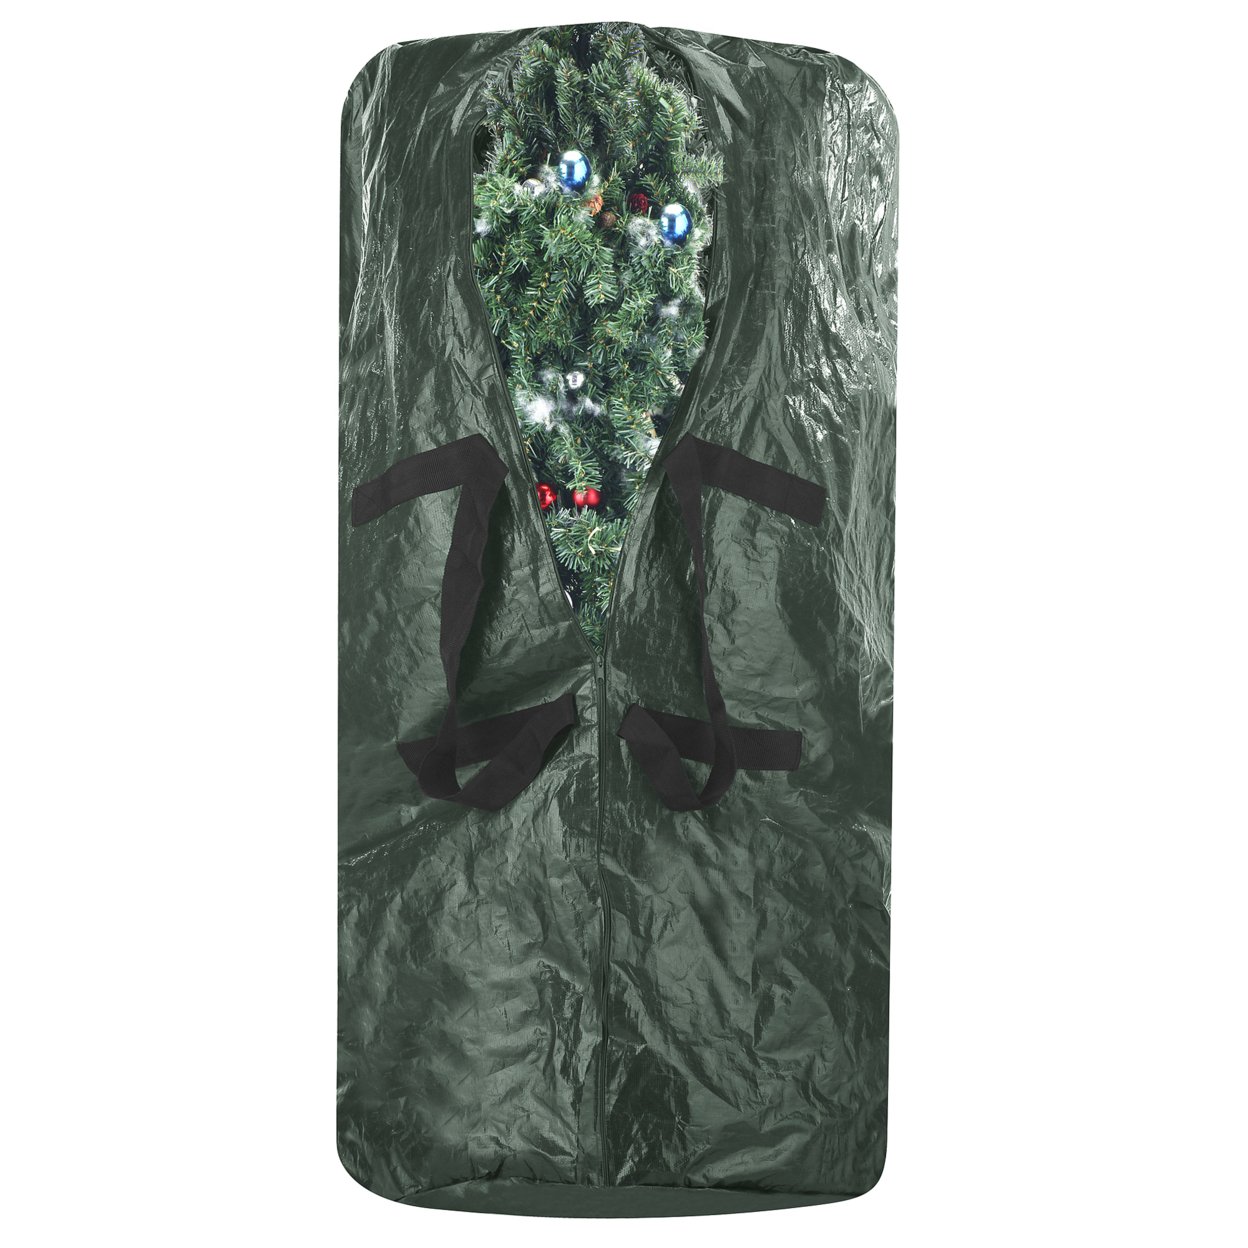 Christmas Tree Zipper Storage Bag Holds Fake Unassembled Trees Up To 9 Ft High